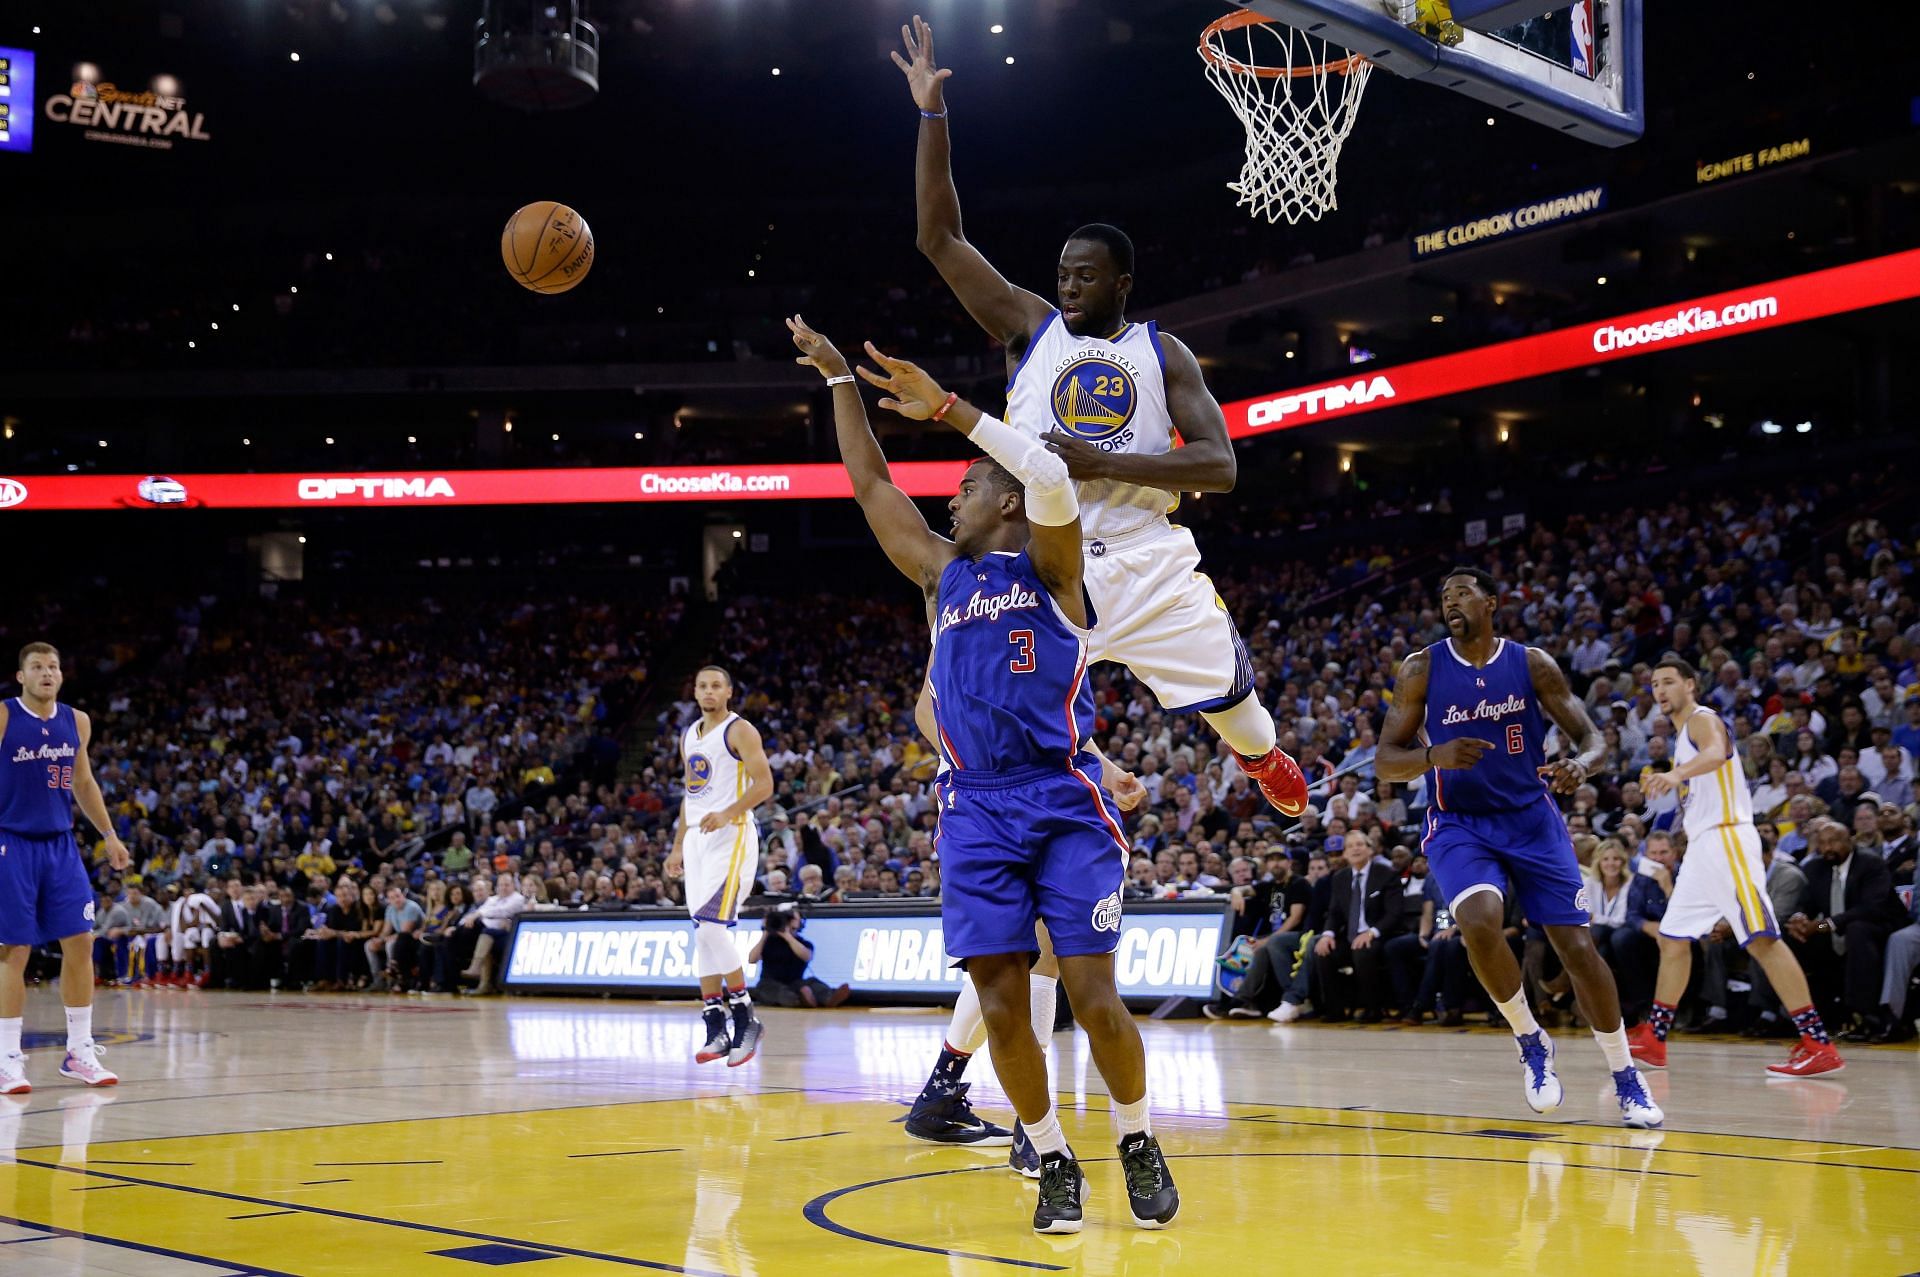 Chris Paul #3 of the Los Angeles Clippers passes the ball while defended by Draymond Green #23 of the Golden State Warriors.